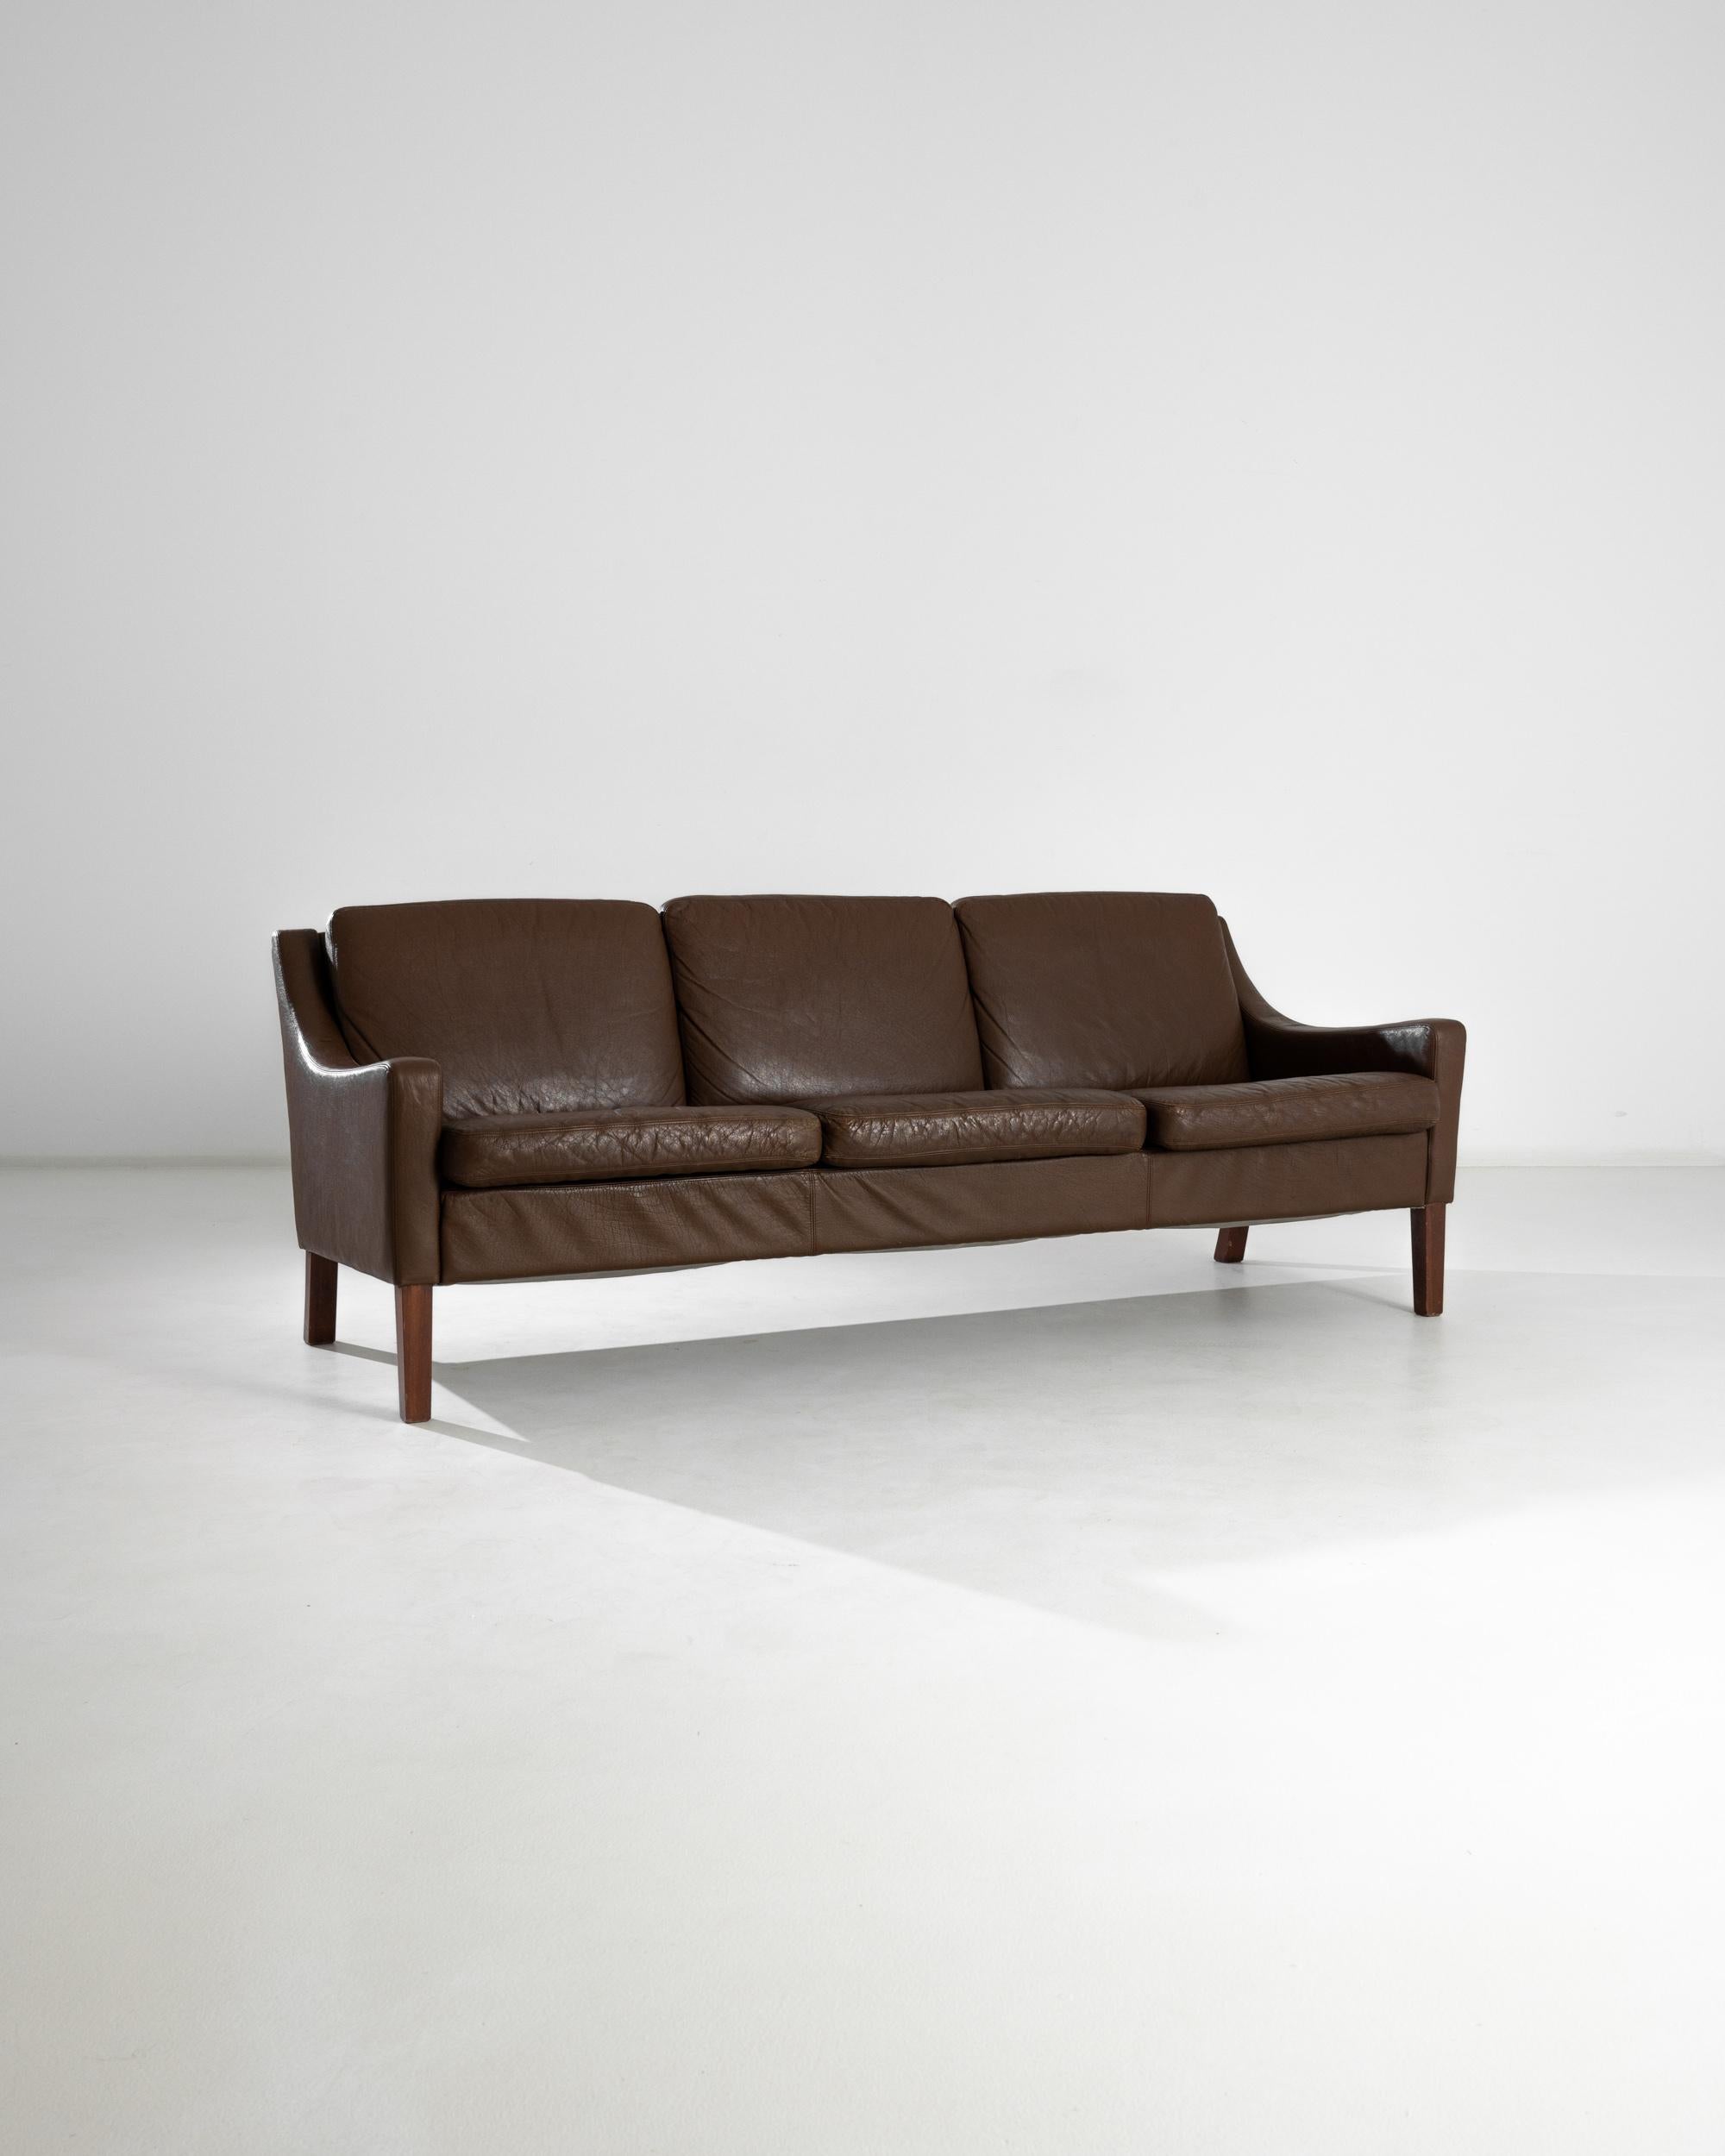 A leather sofa from Denmark, produced during the 20th Century. A beautiful vintage three-seater sofa wrapped in sumptuous brown leather. Standing on four squared legs, this piece sits at a confluence of 20th century styles: in it we see clean modern